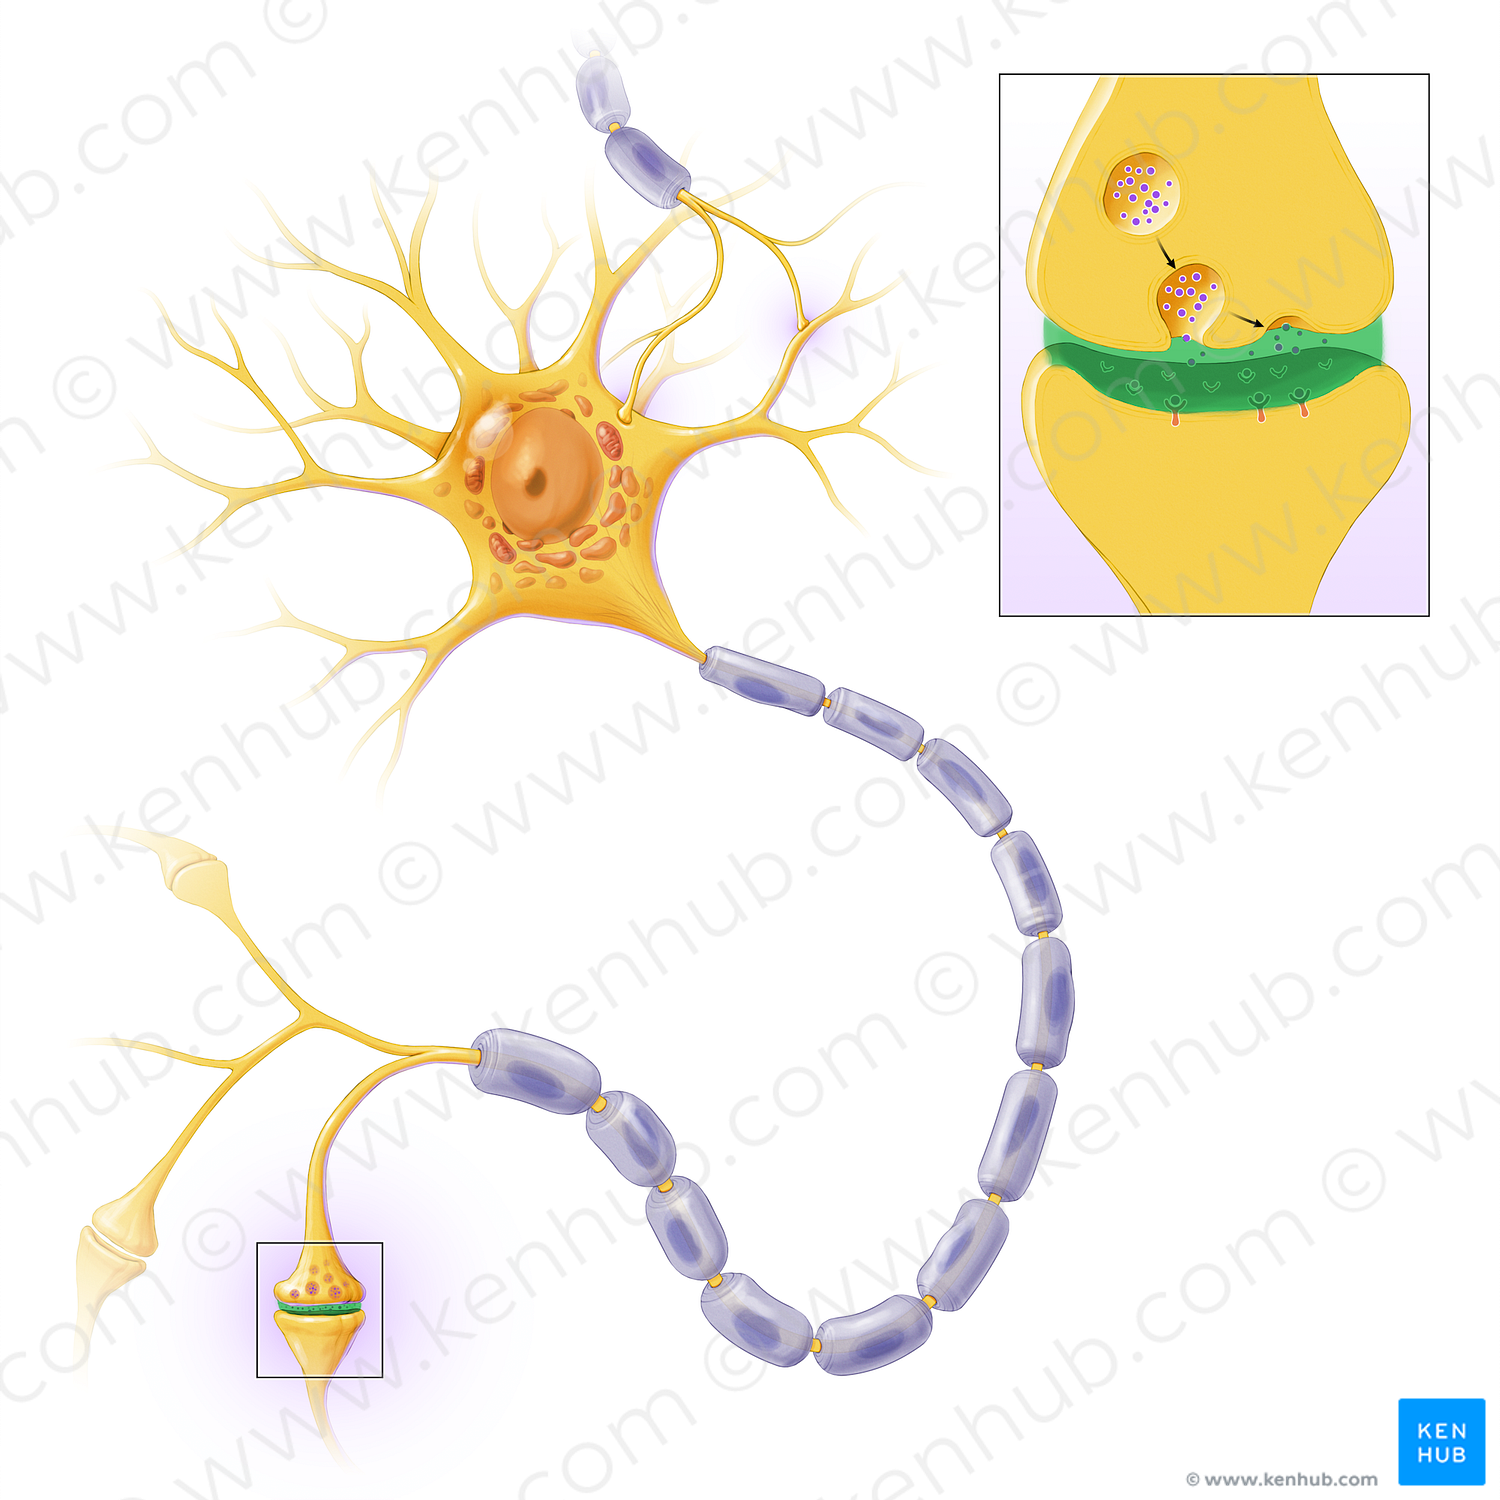 Synaptic cleft (#13597)